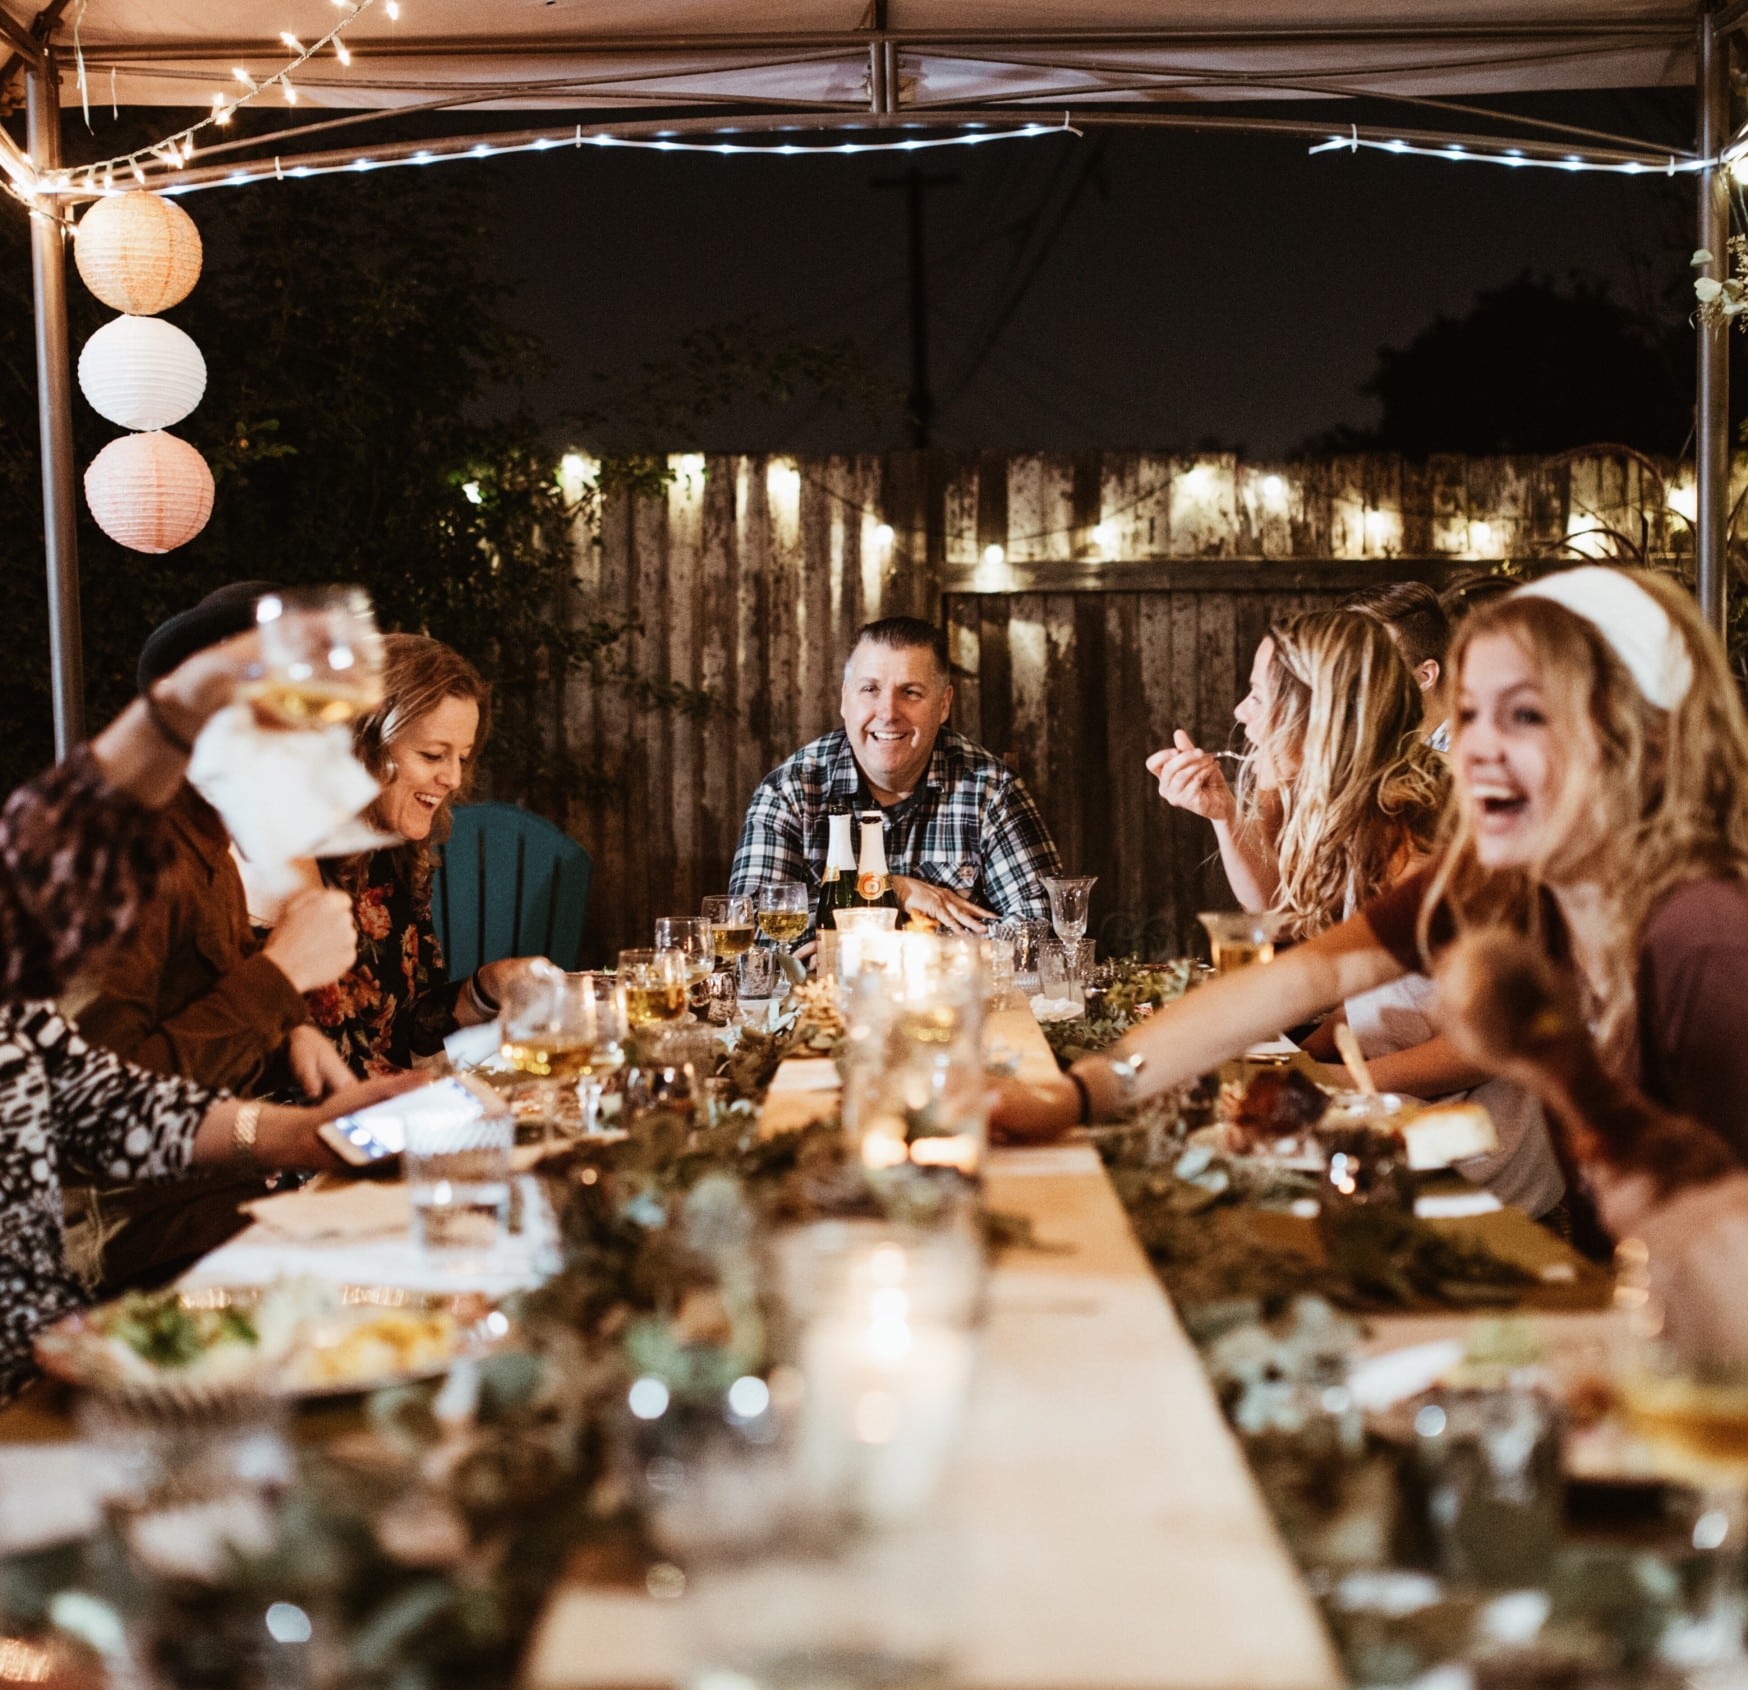 How to avoid feeling awkward at a party when you’re not drinking - spunout